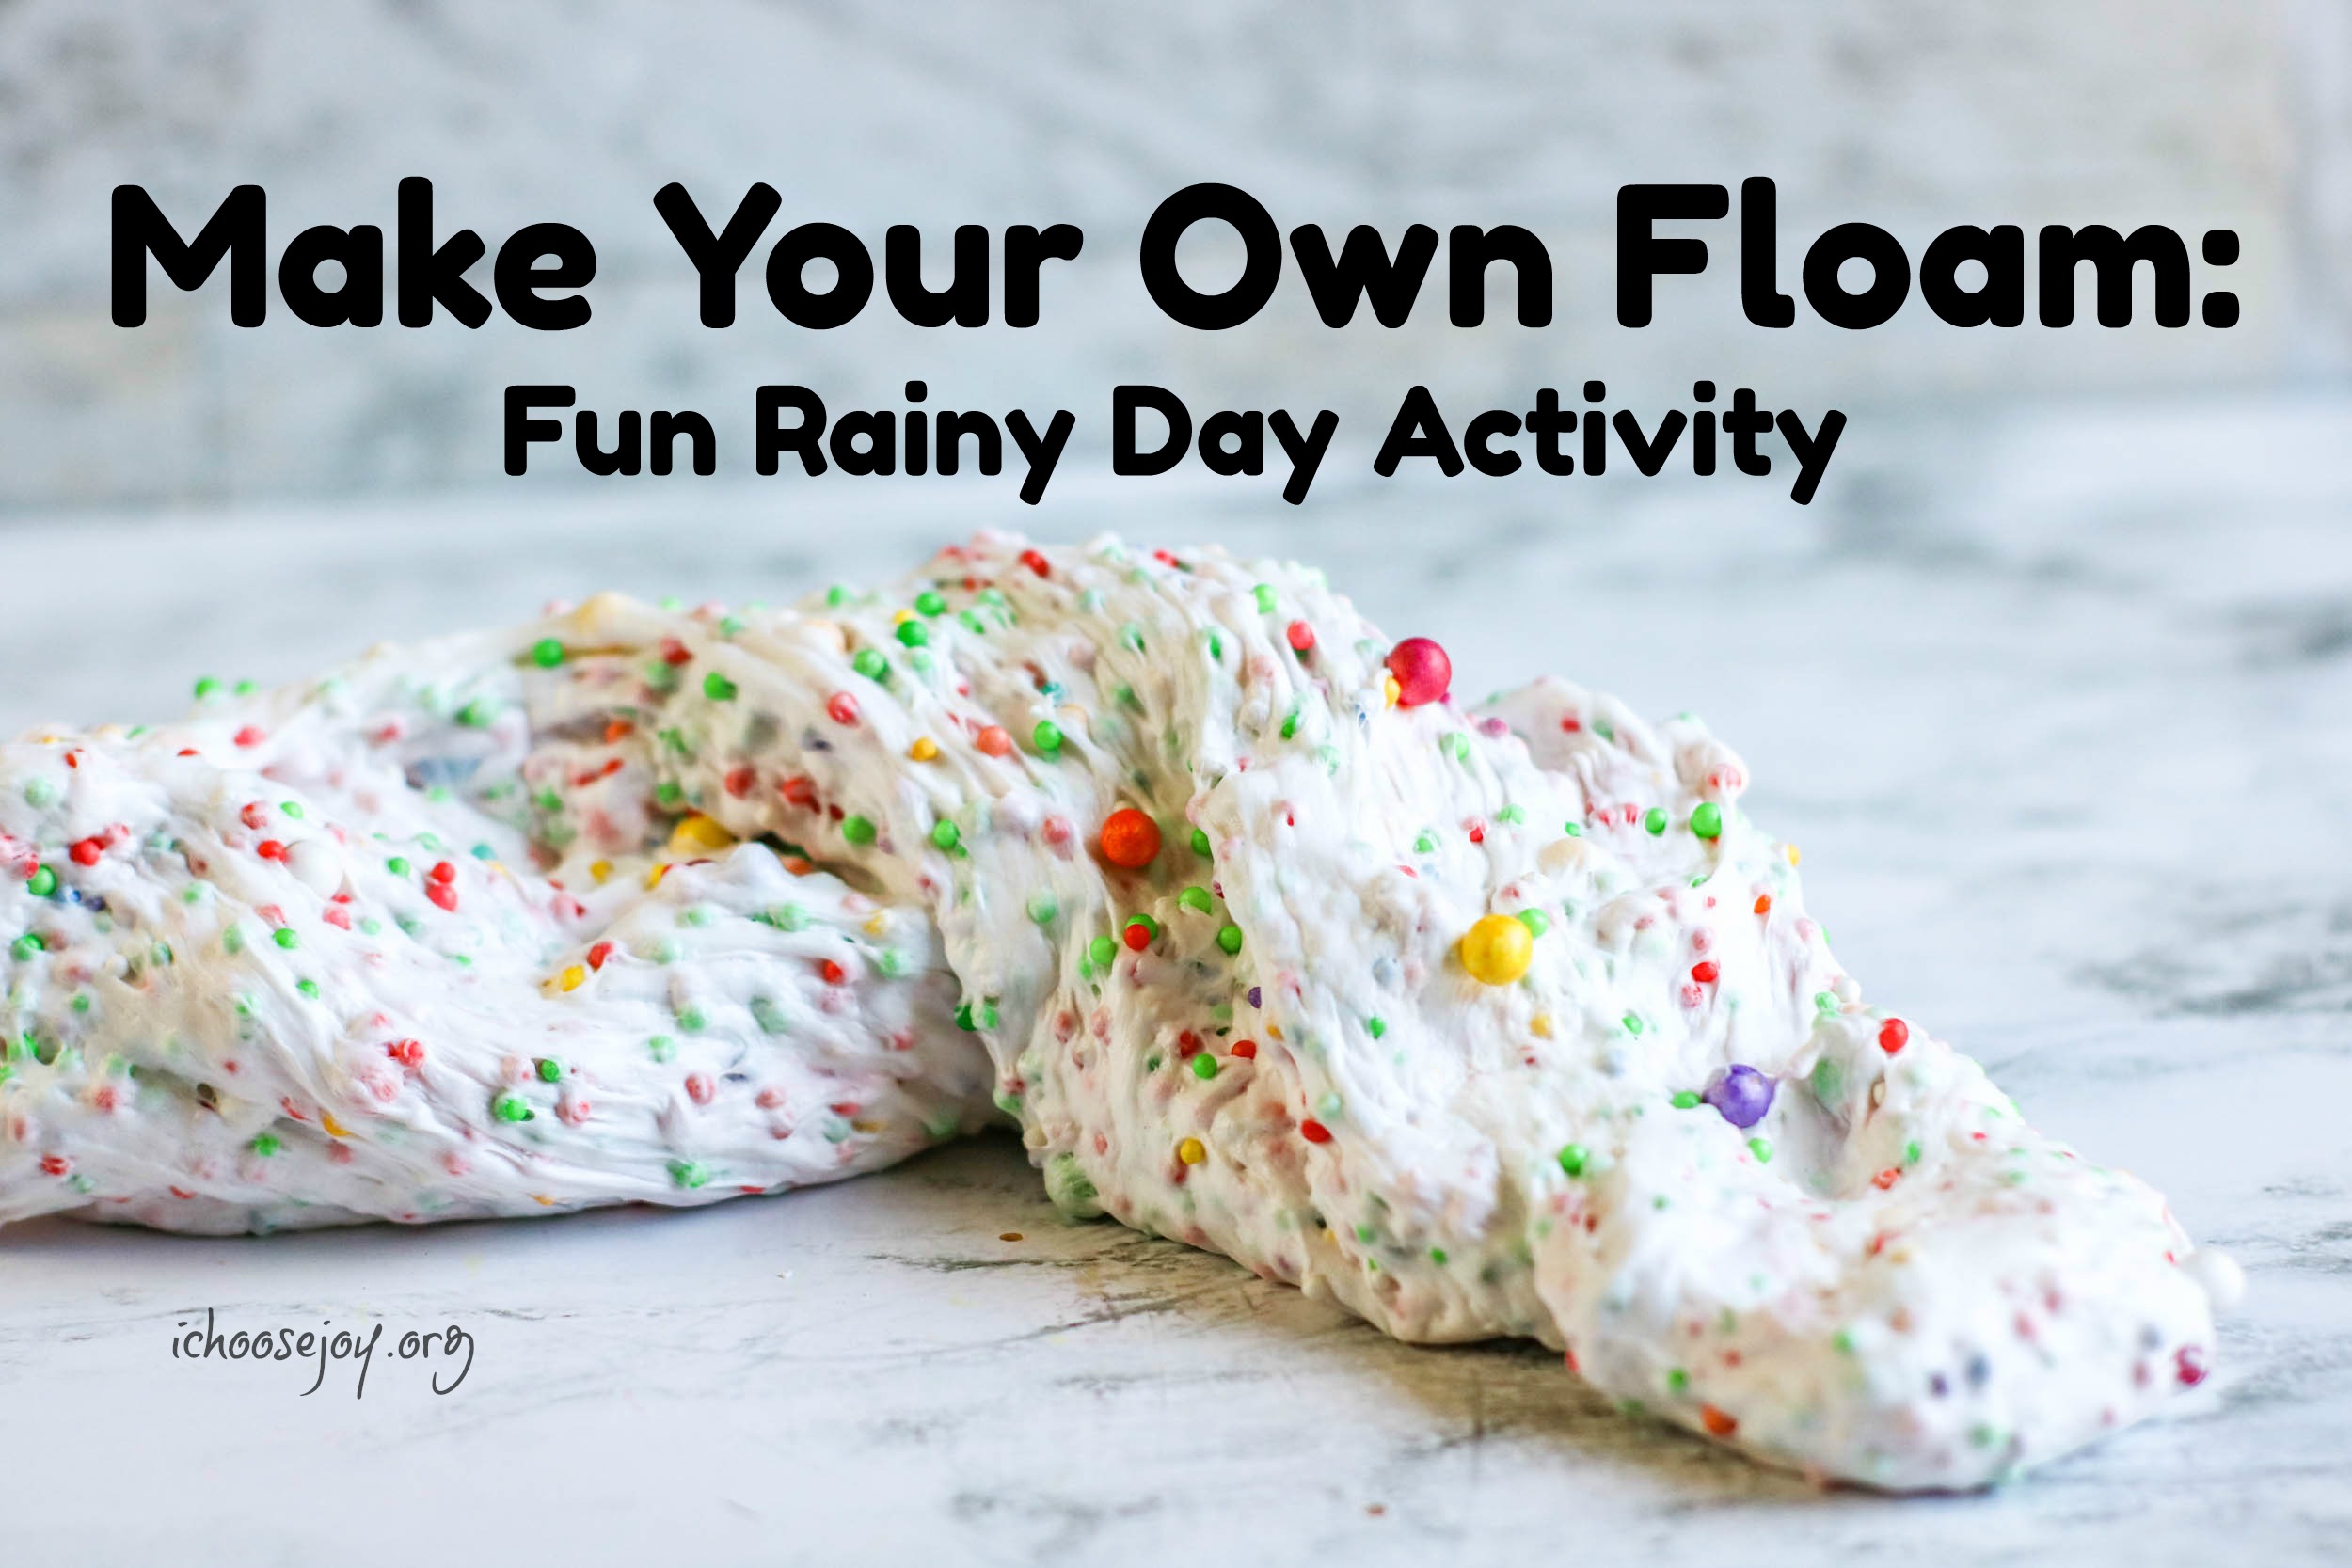 Make Your Own Floam: Fun Rainy Day Activity